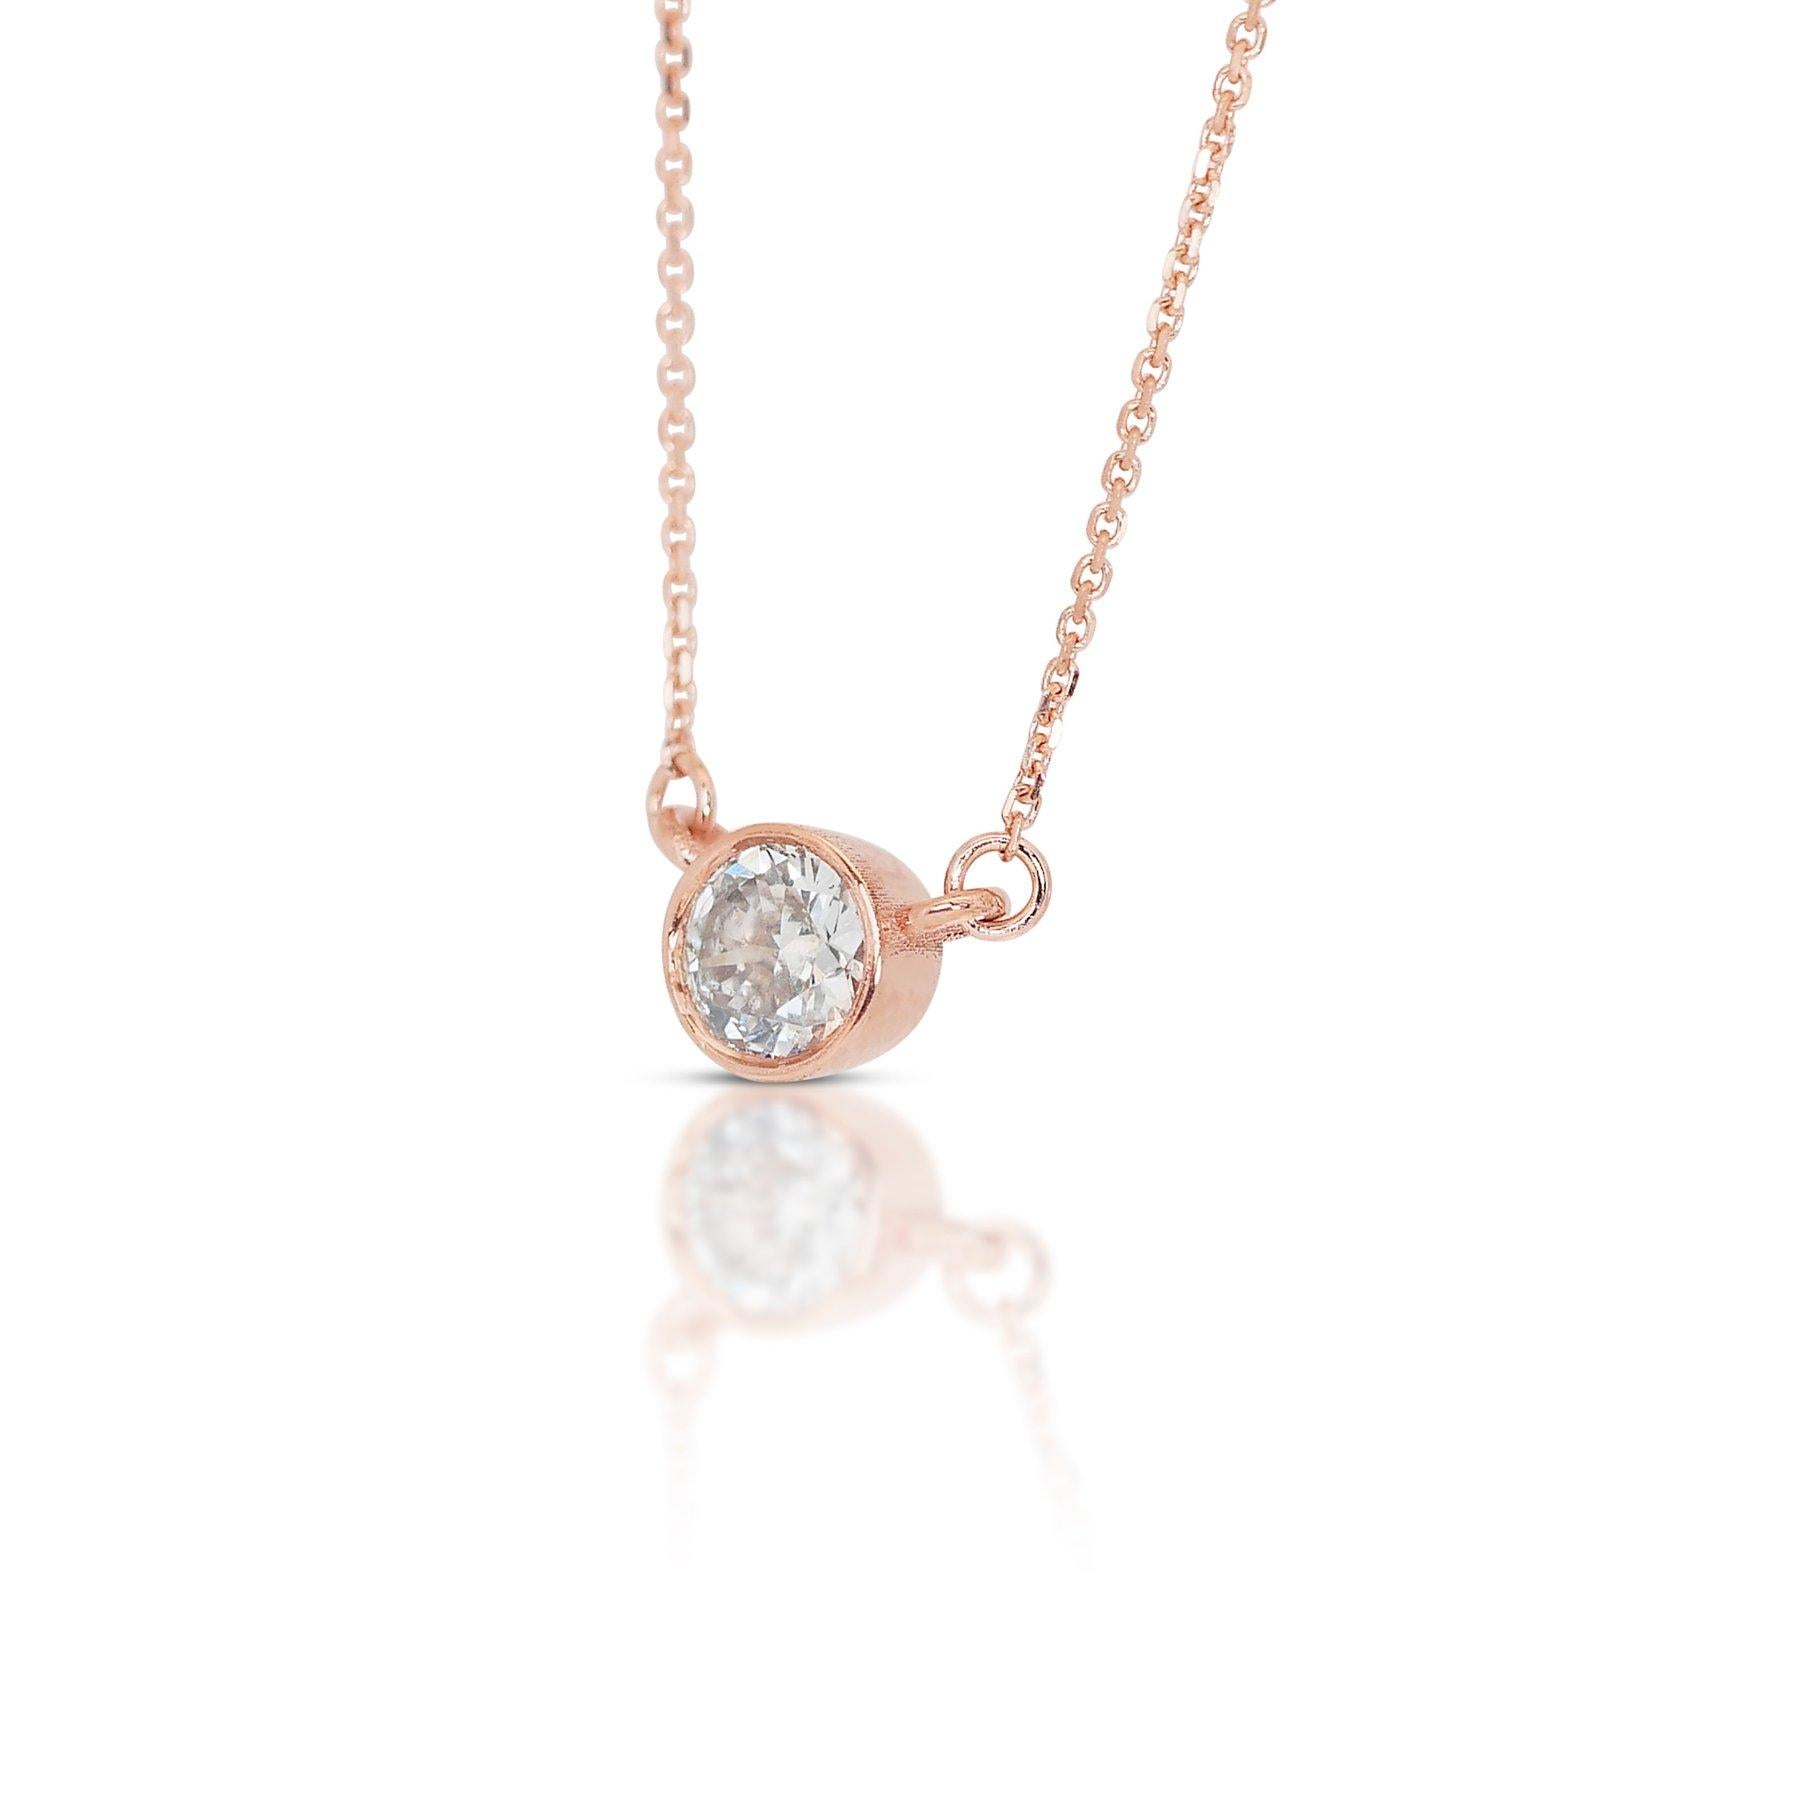 Captivating 18K Rose Gold Natural Diamond Necklace w/0.70ct 

This captivating necklace showcases a stunning 0.70 carat natural diamond. The delicate 18K rose gold chain, measuring 42 cm in length, complements the diamond perfectly, creating a piece